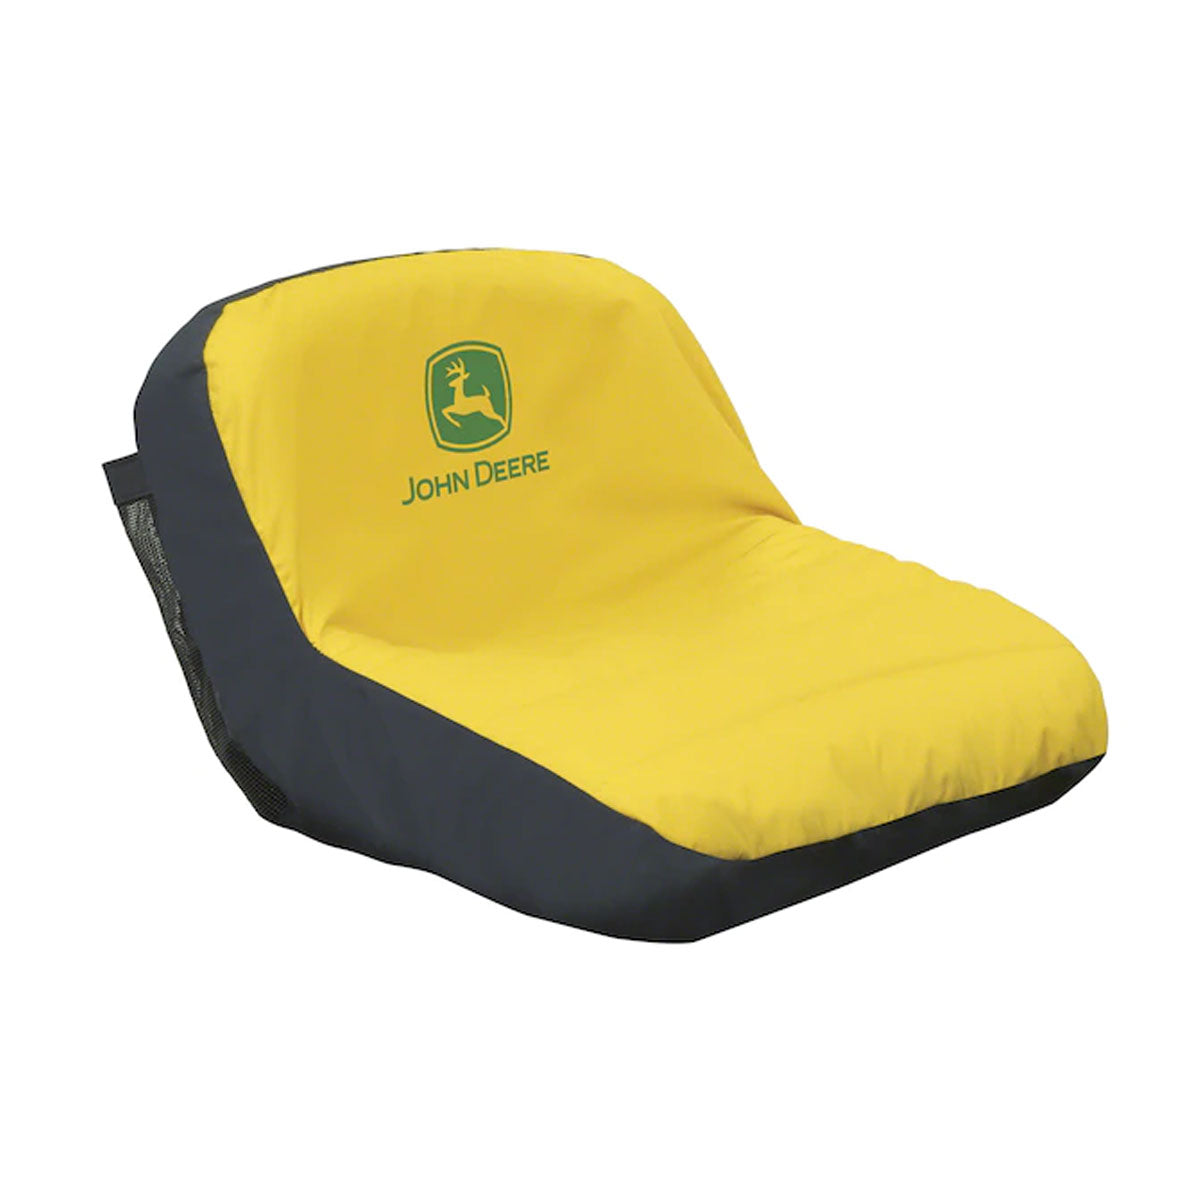 John Deere 11" Small Mower Seat Cover for Ride-on Mowers